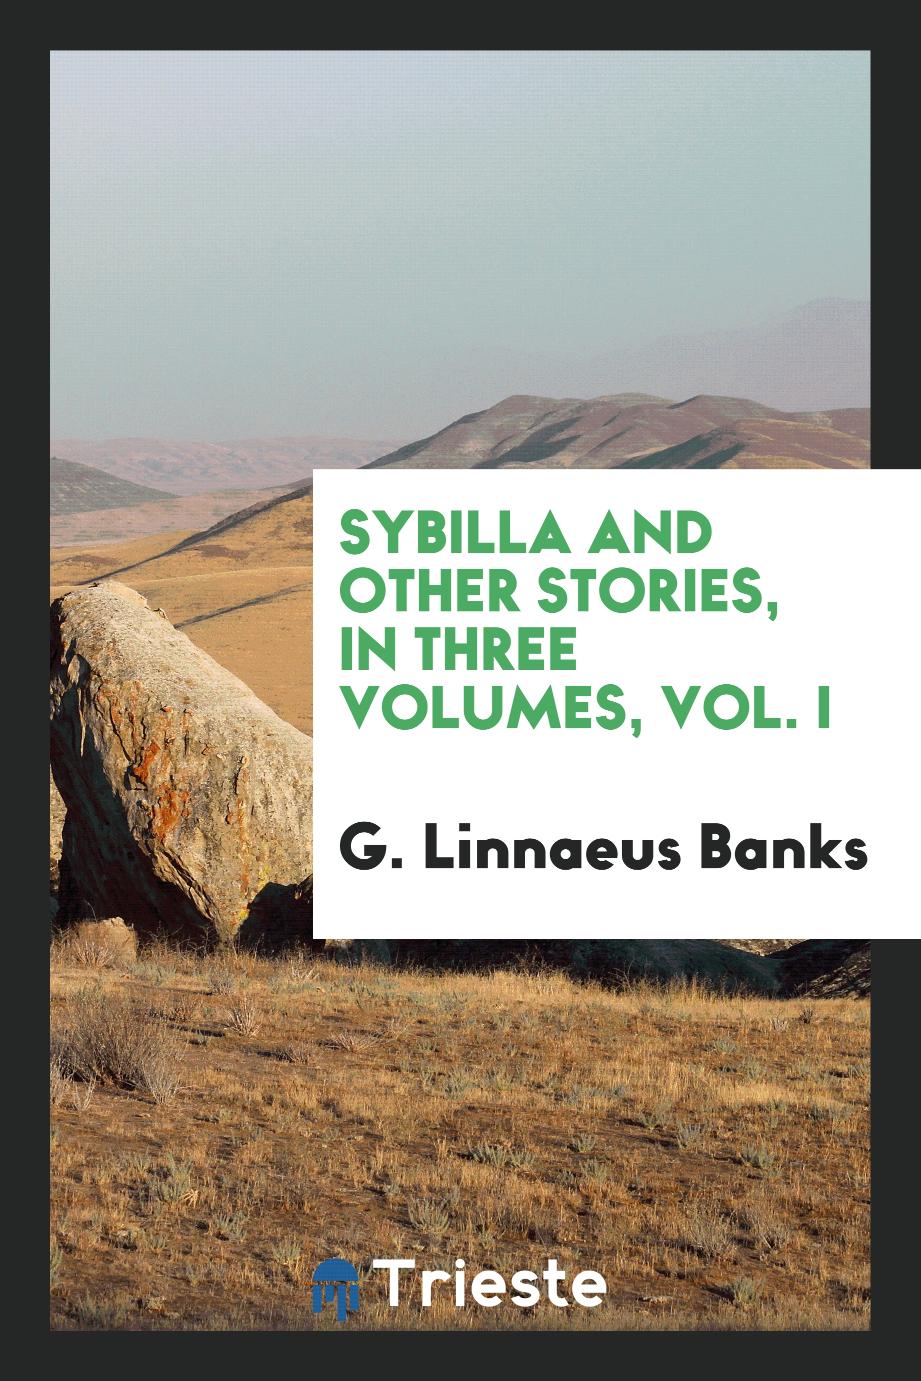 Sybilla and other stories, In three volumes, Vol. I